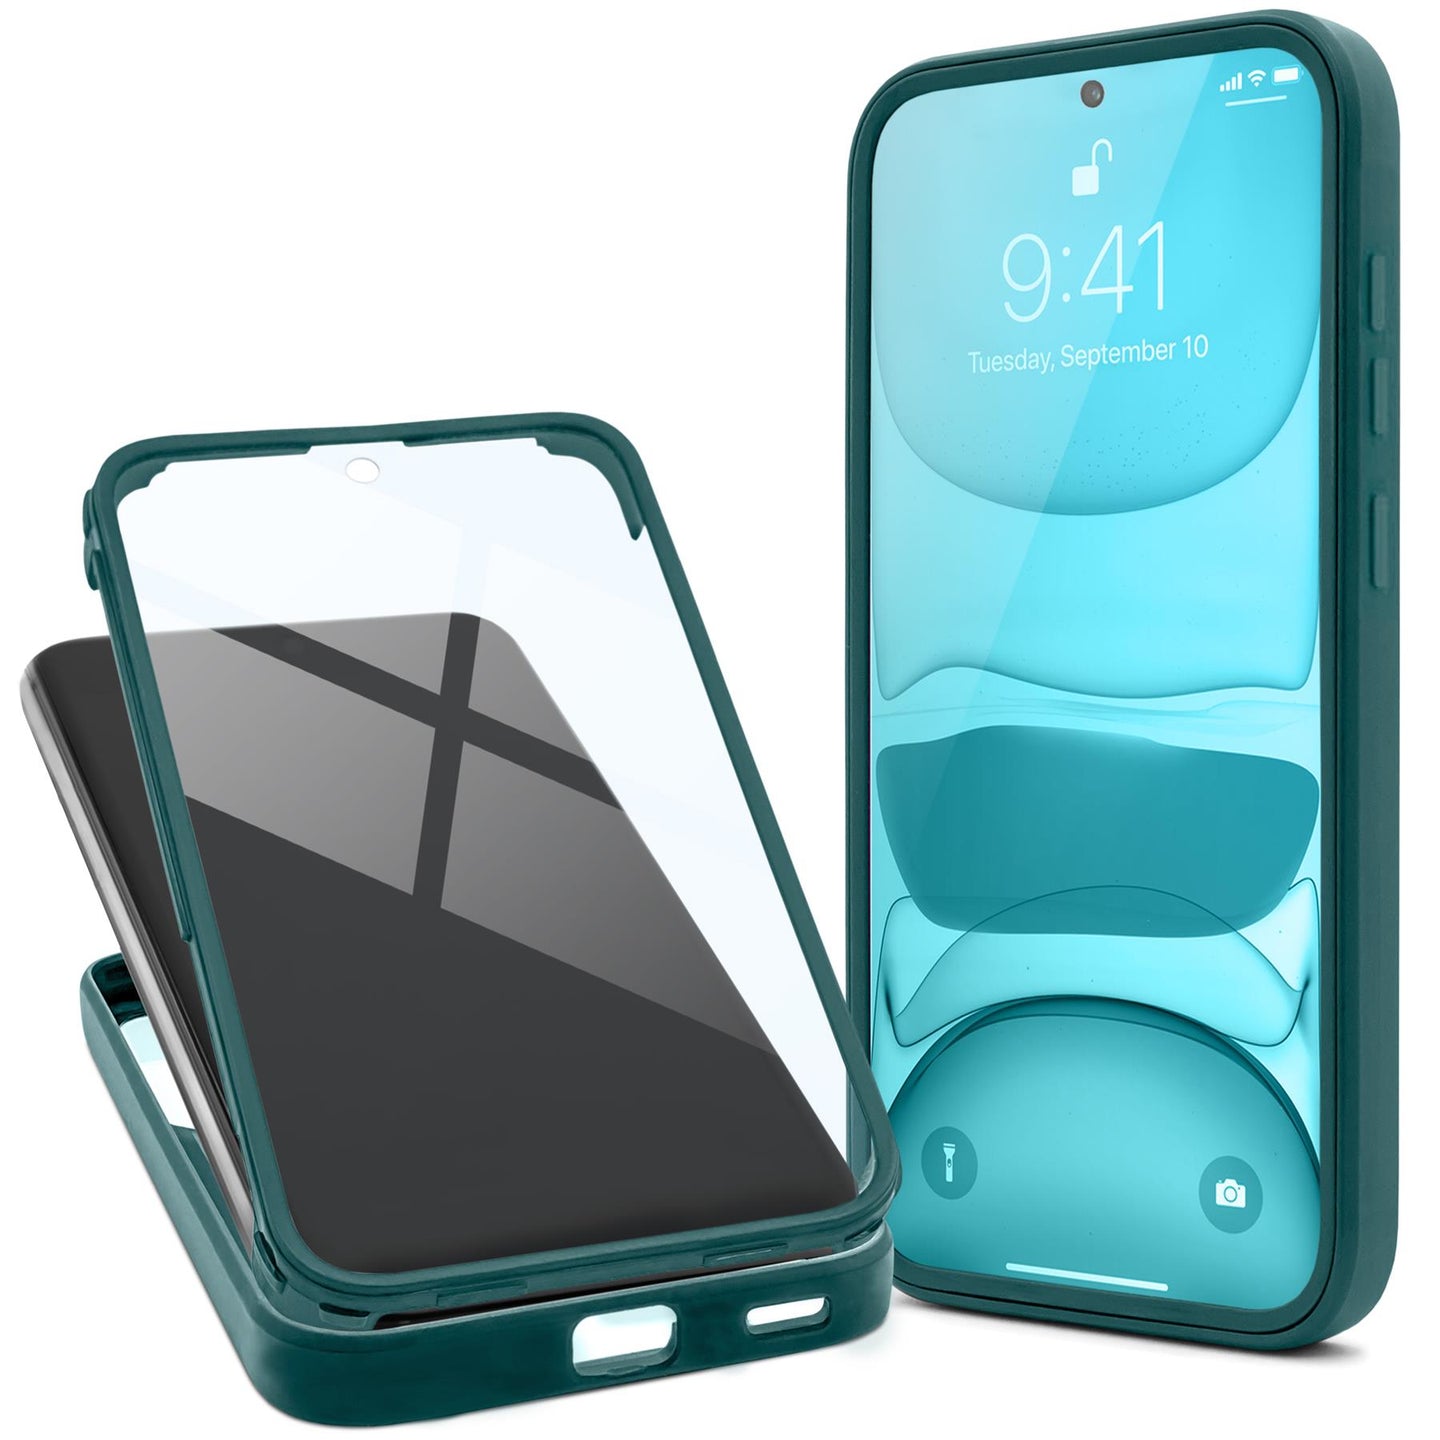 Moozy 360 Case for Samsung S22 Ultra - Green Rim Transparent Case, Full Body Double-sided Protection, Cover with Built-in Screen Protector